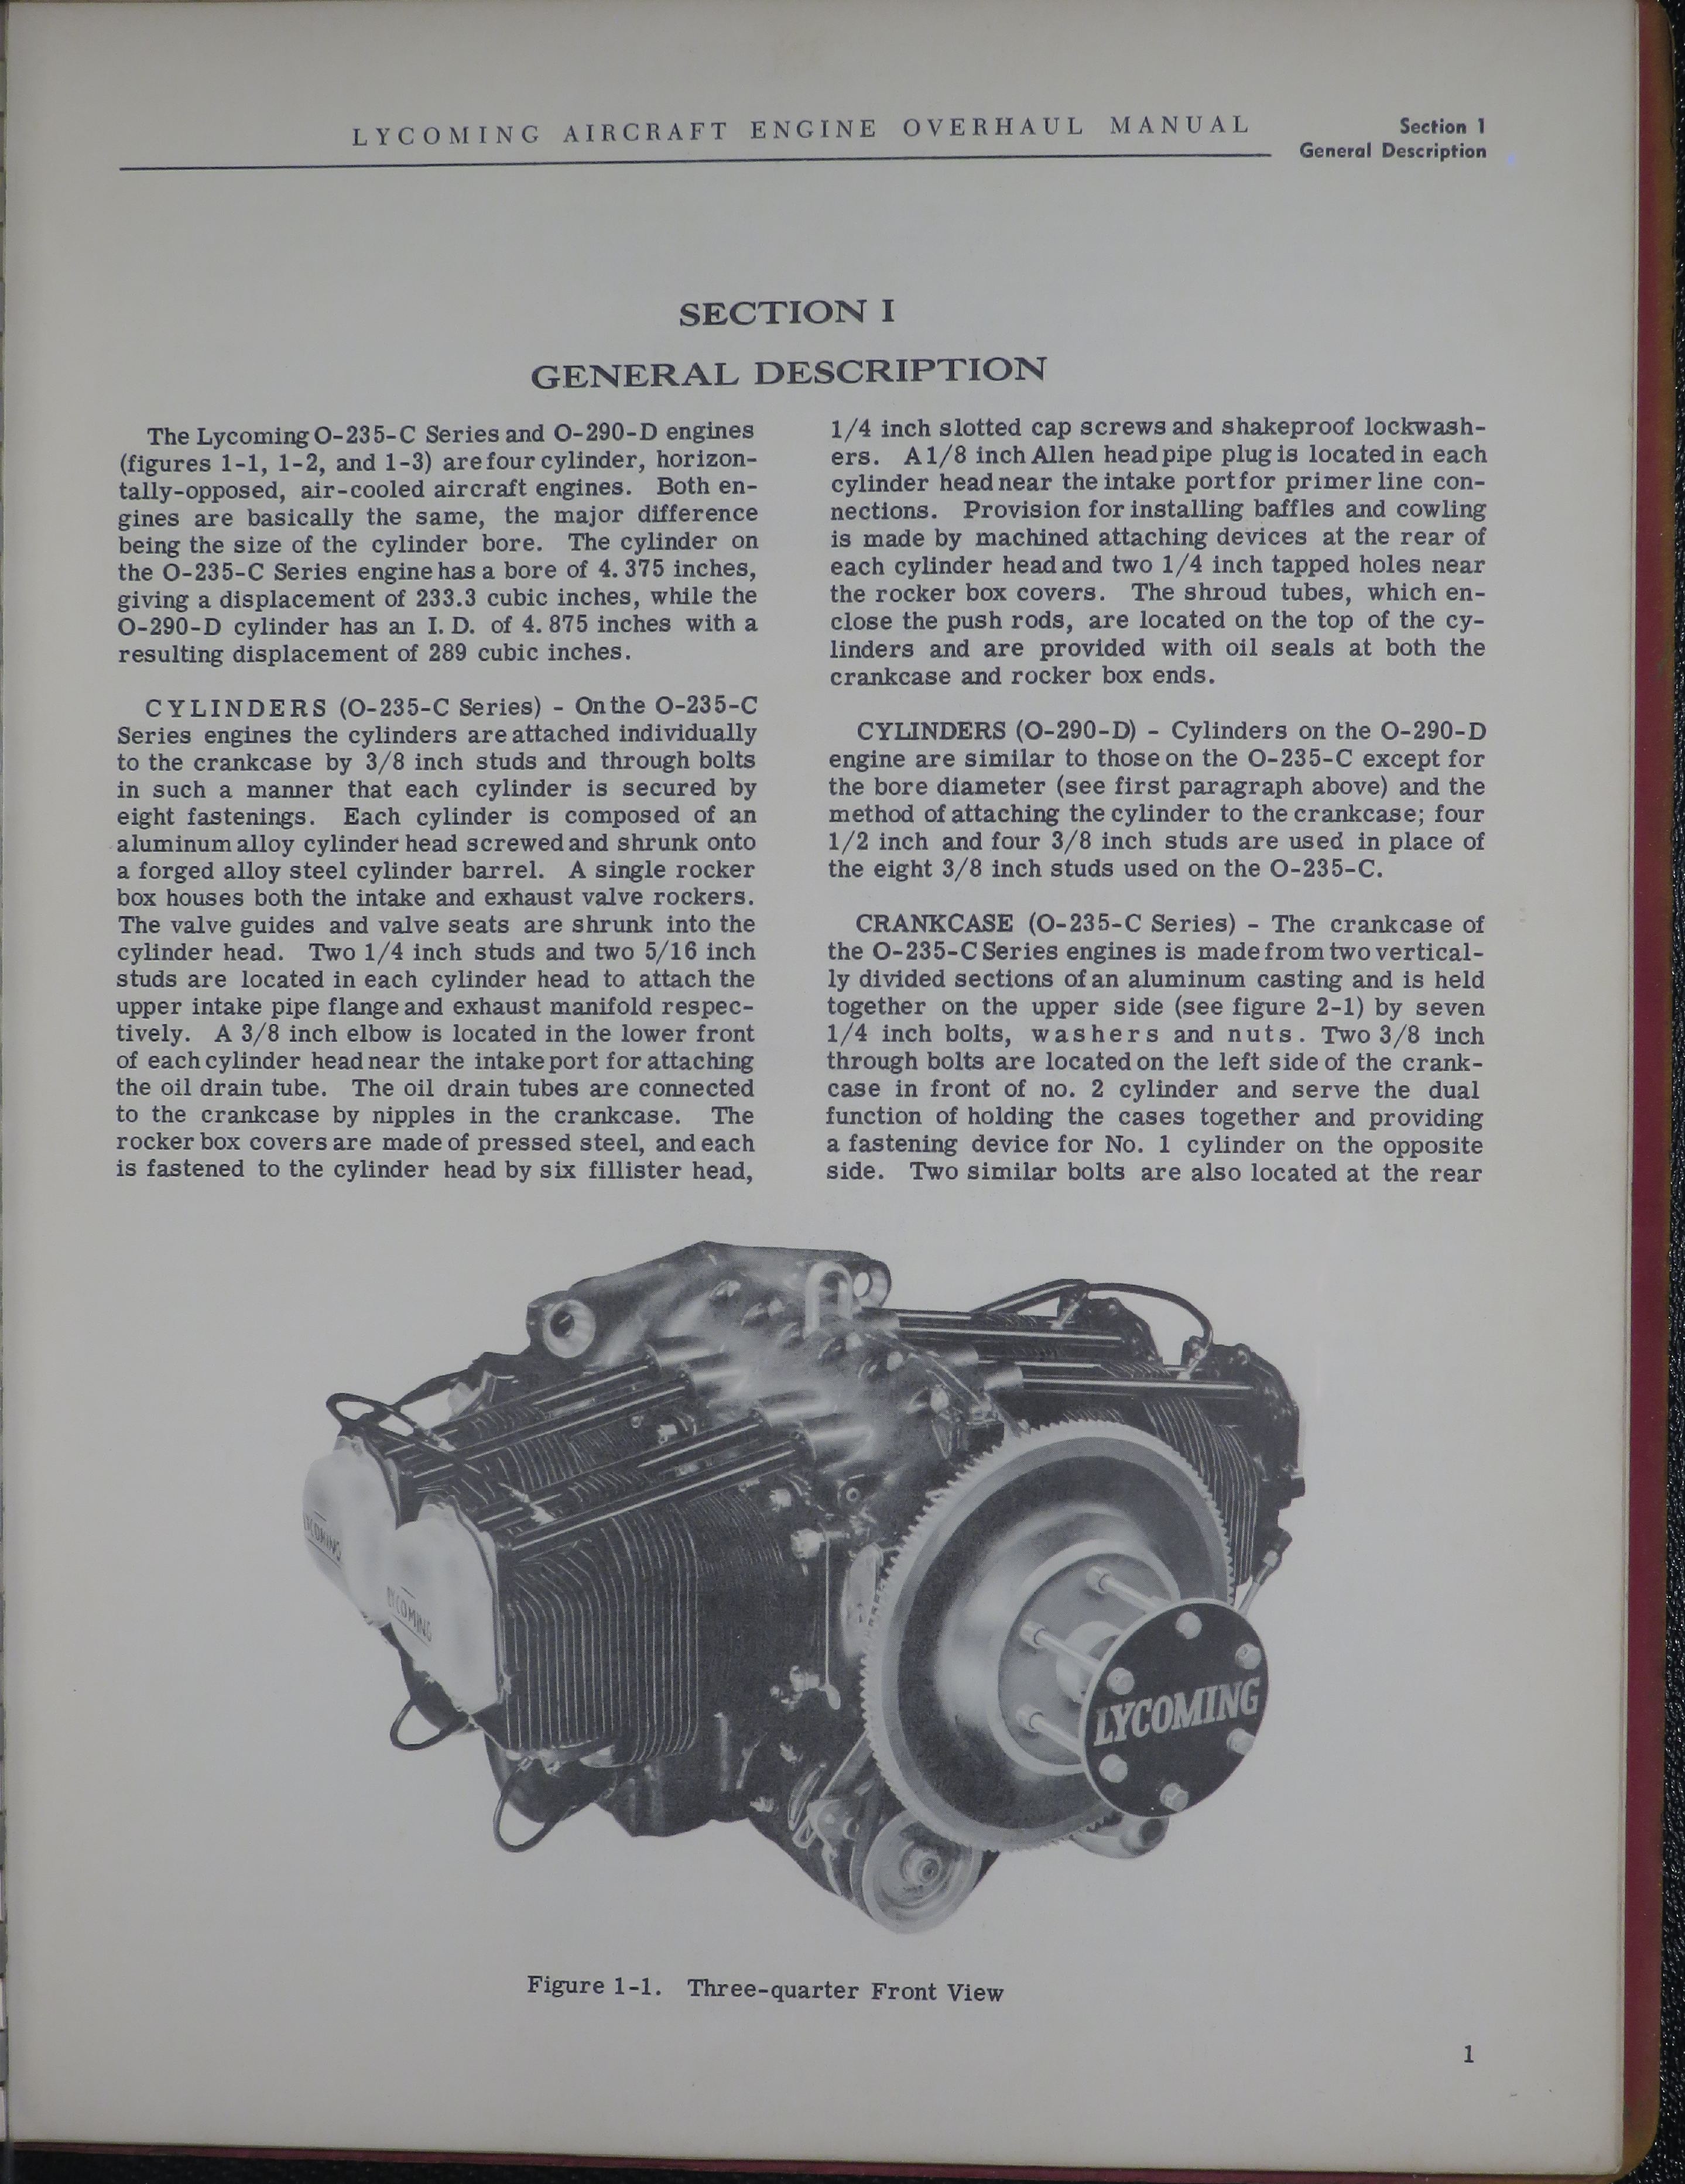 Sample page 7 from AirCorps Library document: Overhaul Manual for Lycoming Model 0-235-C Series and 0-290-D Engines